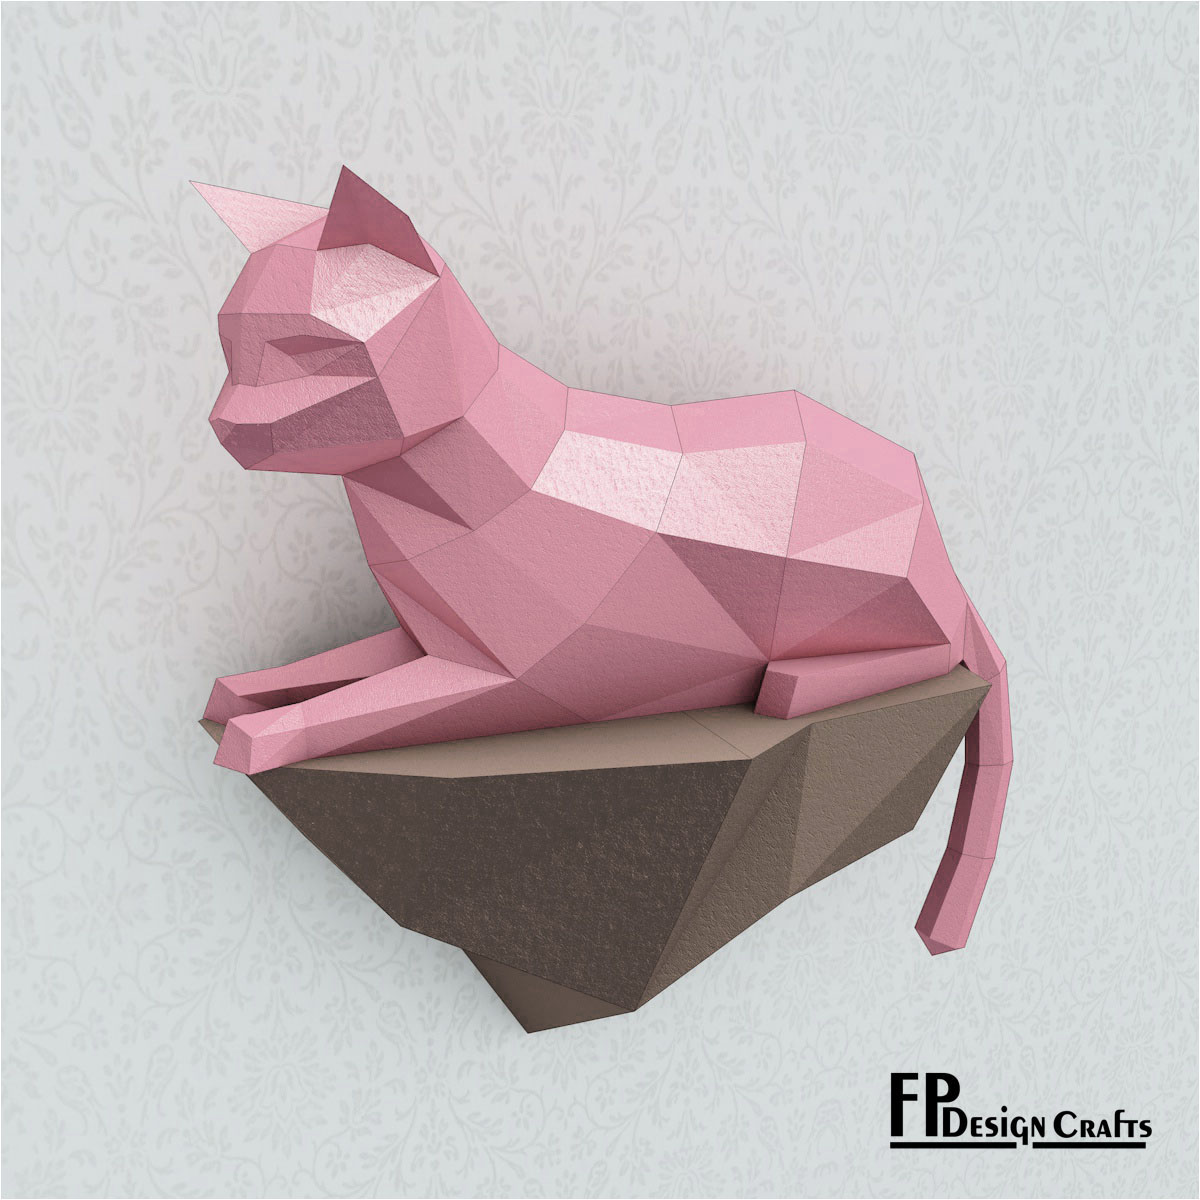 Cat on a Stone Papercraft, 3D DIY origami, Sculpture, low poly cat